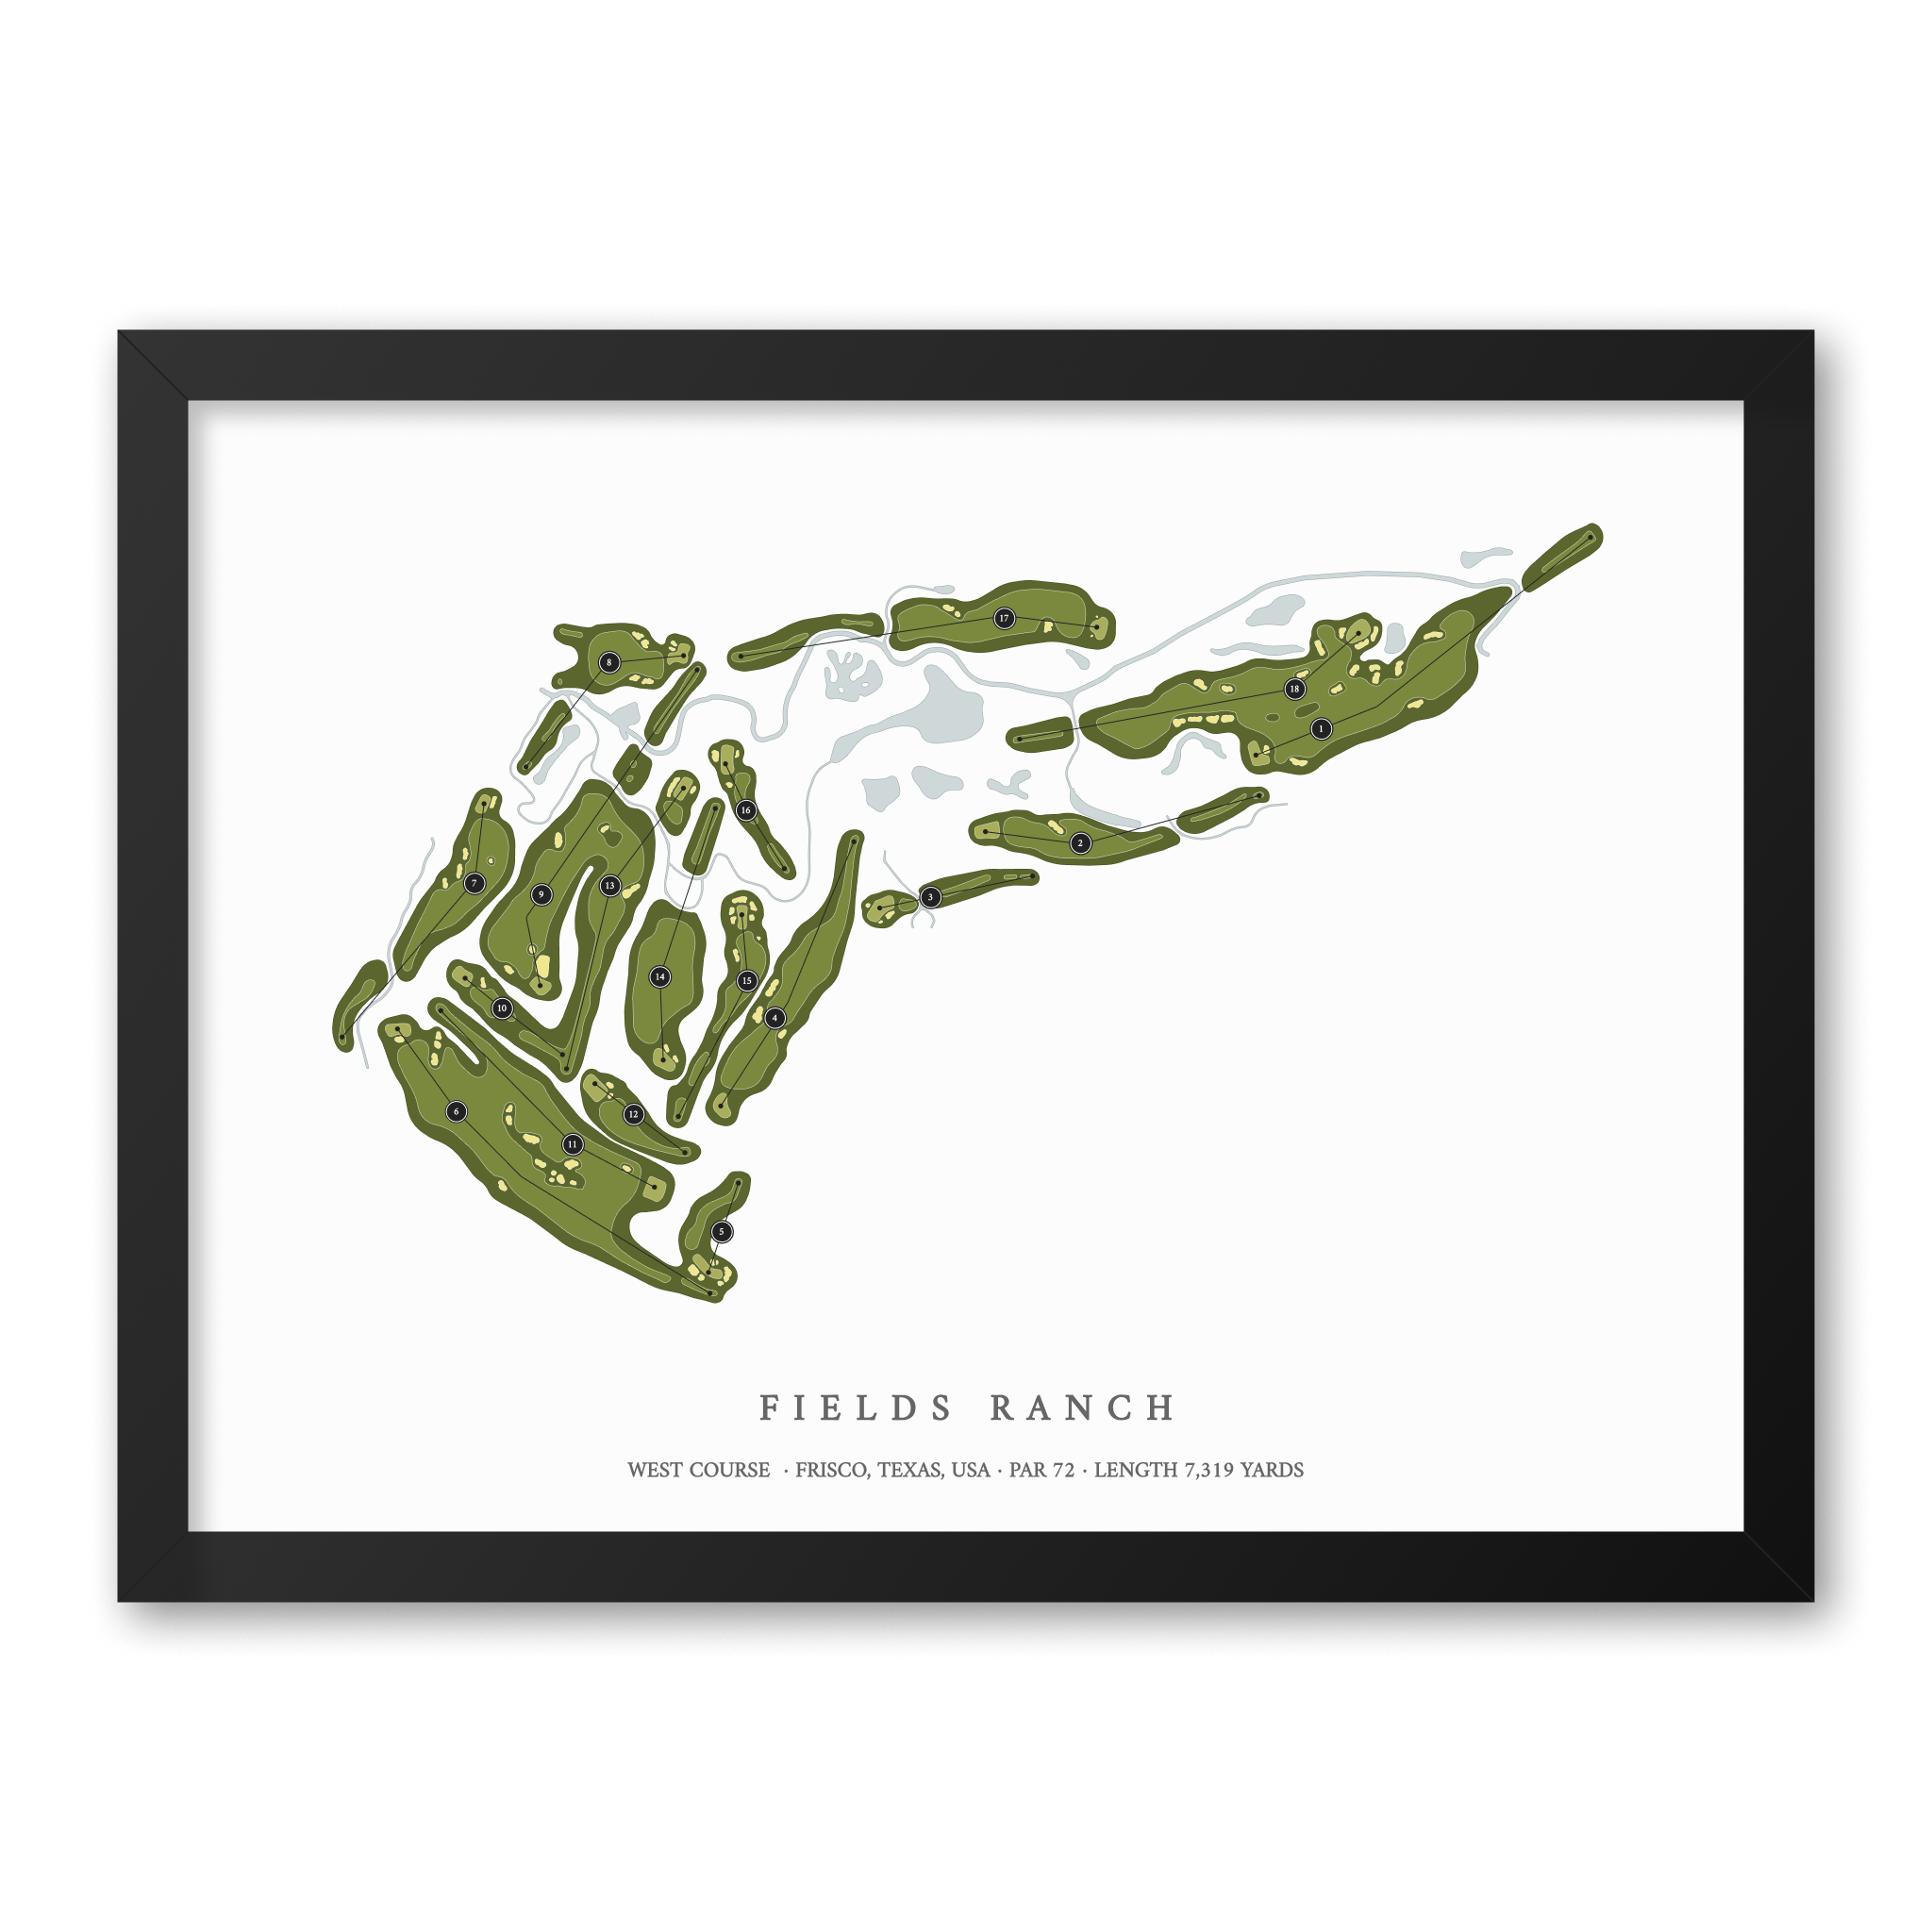 Fields Ranch - West Course | Golf Course Map | Black Frame With Hole Numbers #hole numbers_yes